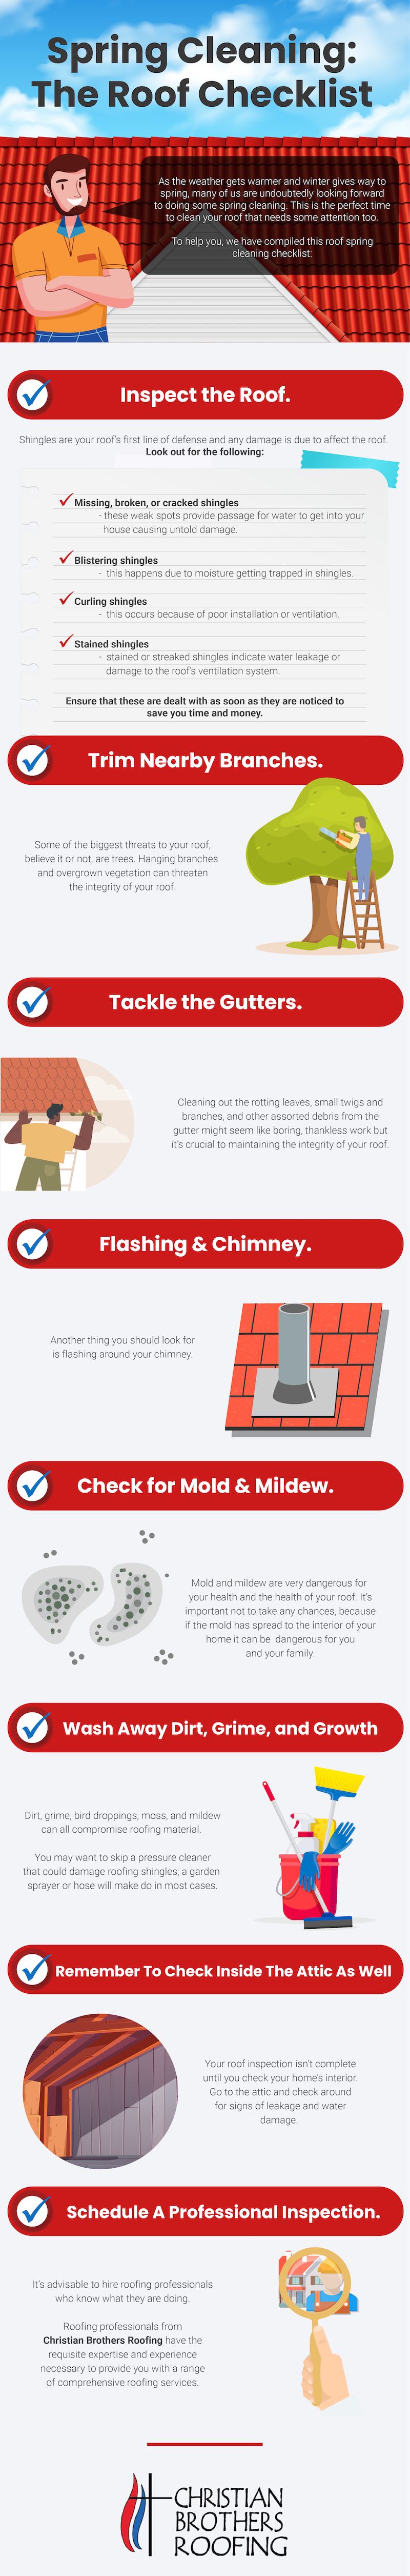 Spring Cleaning The Roof Checklist - Infographic